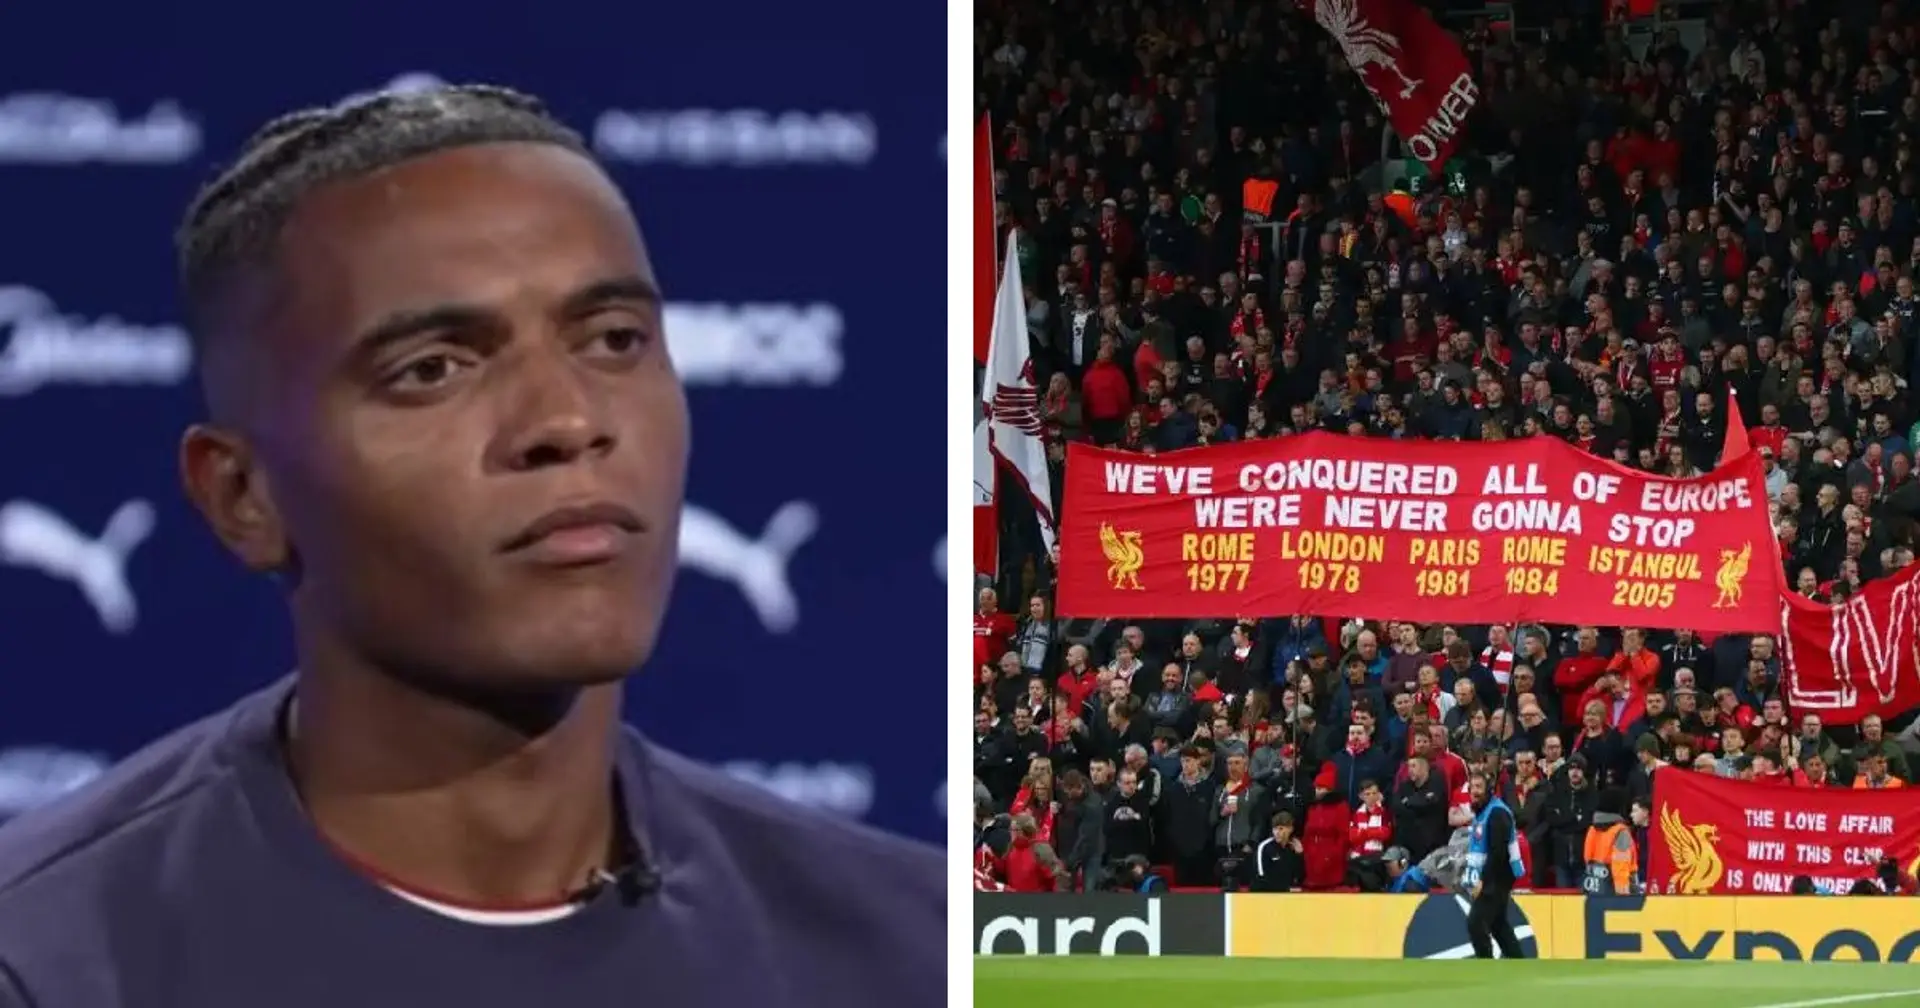 'I was like everybody talks so highly of it and I don’t really see it': Akanji on Anfield atmosphere